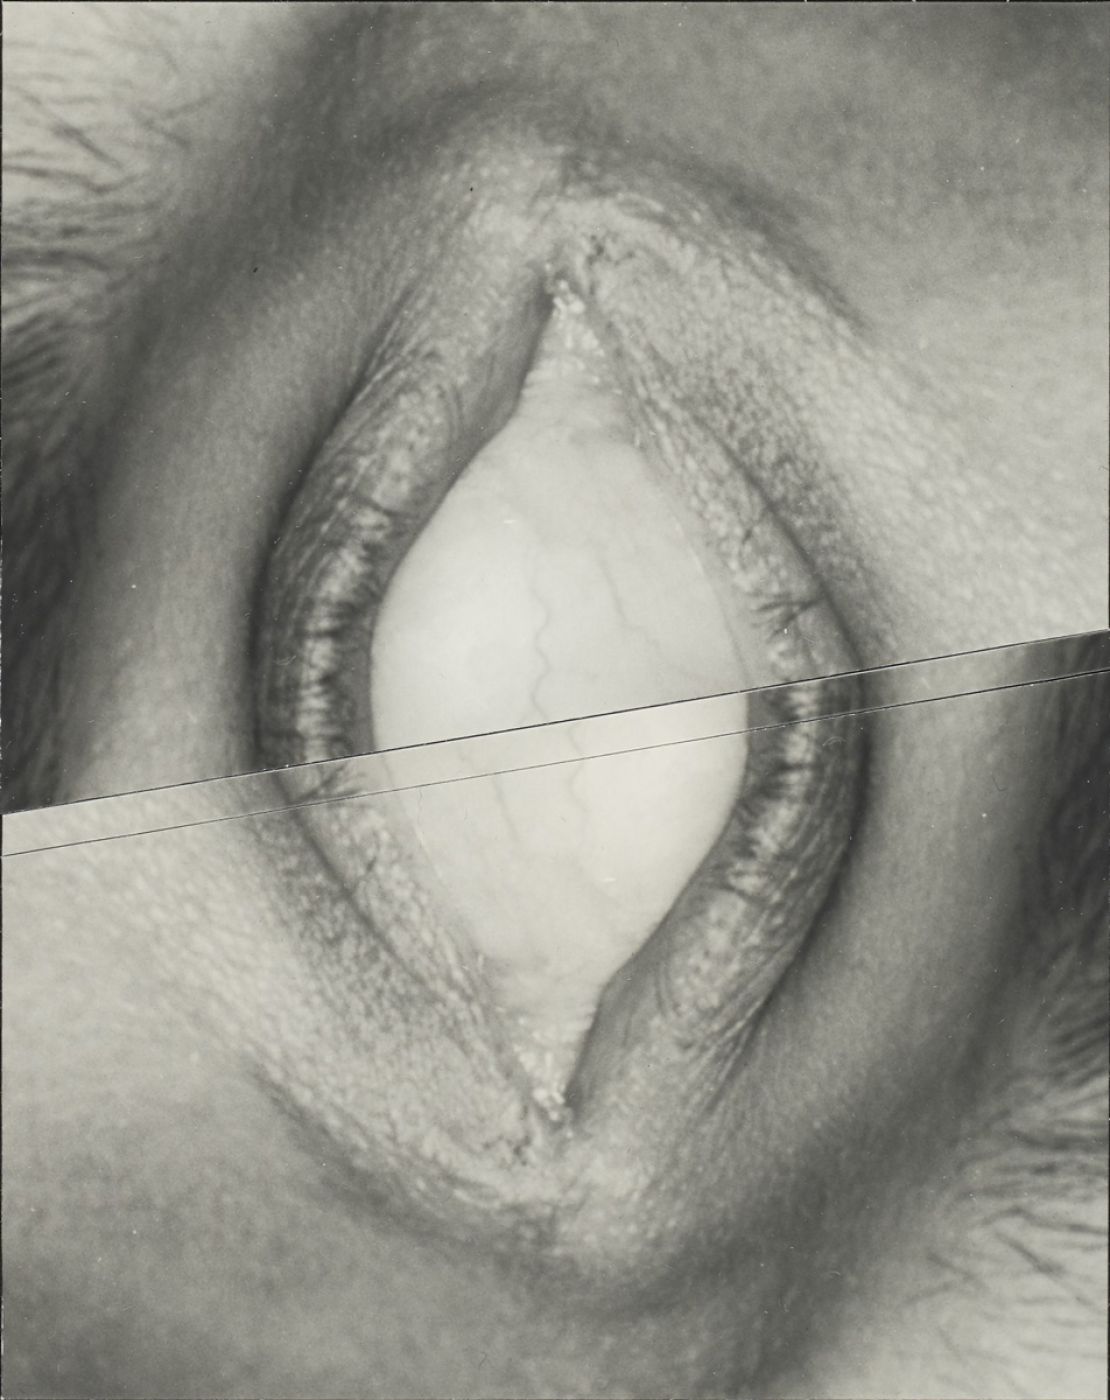 Marco Breuer, “Untitled (Tomorrow Never Comes-Eye)”, 1997